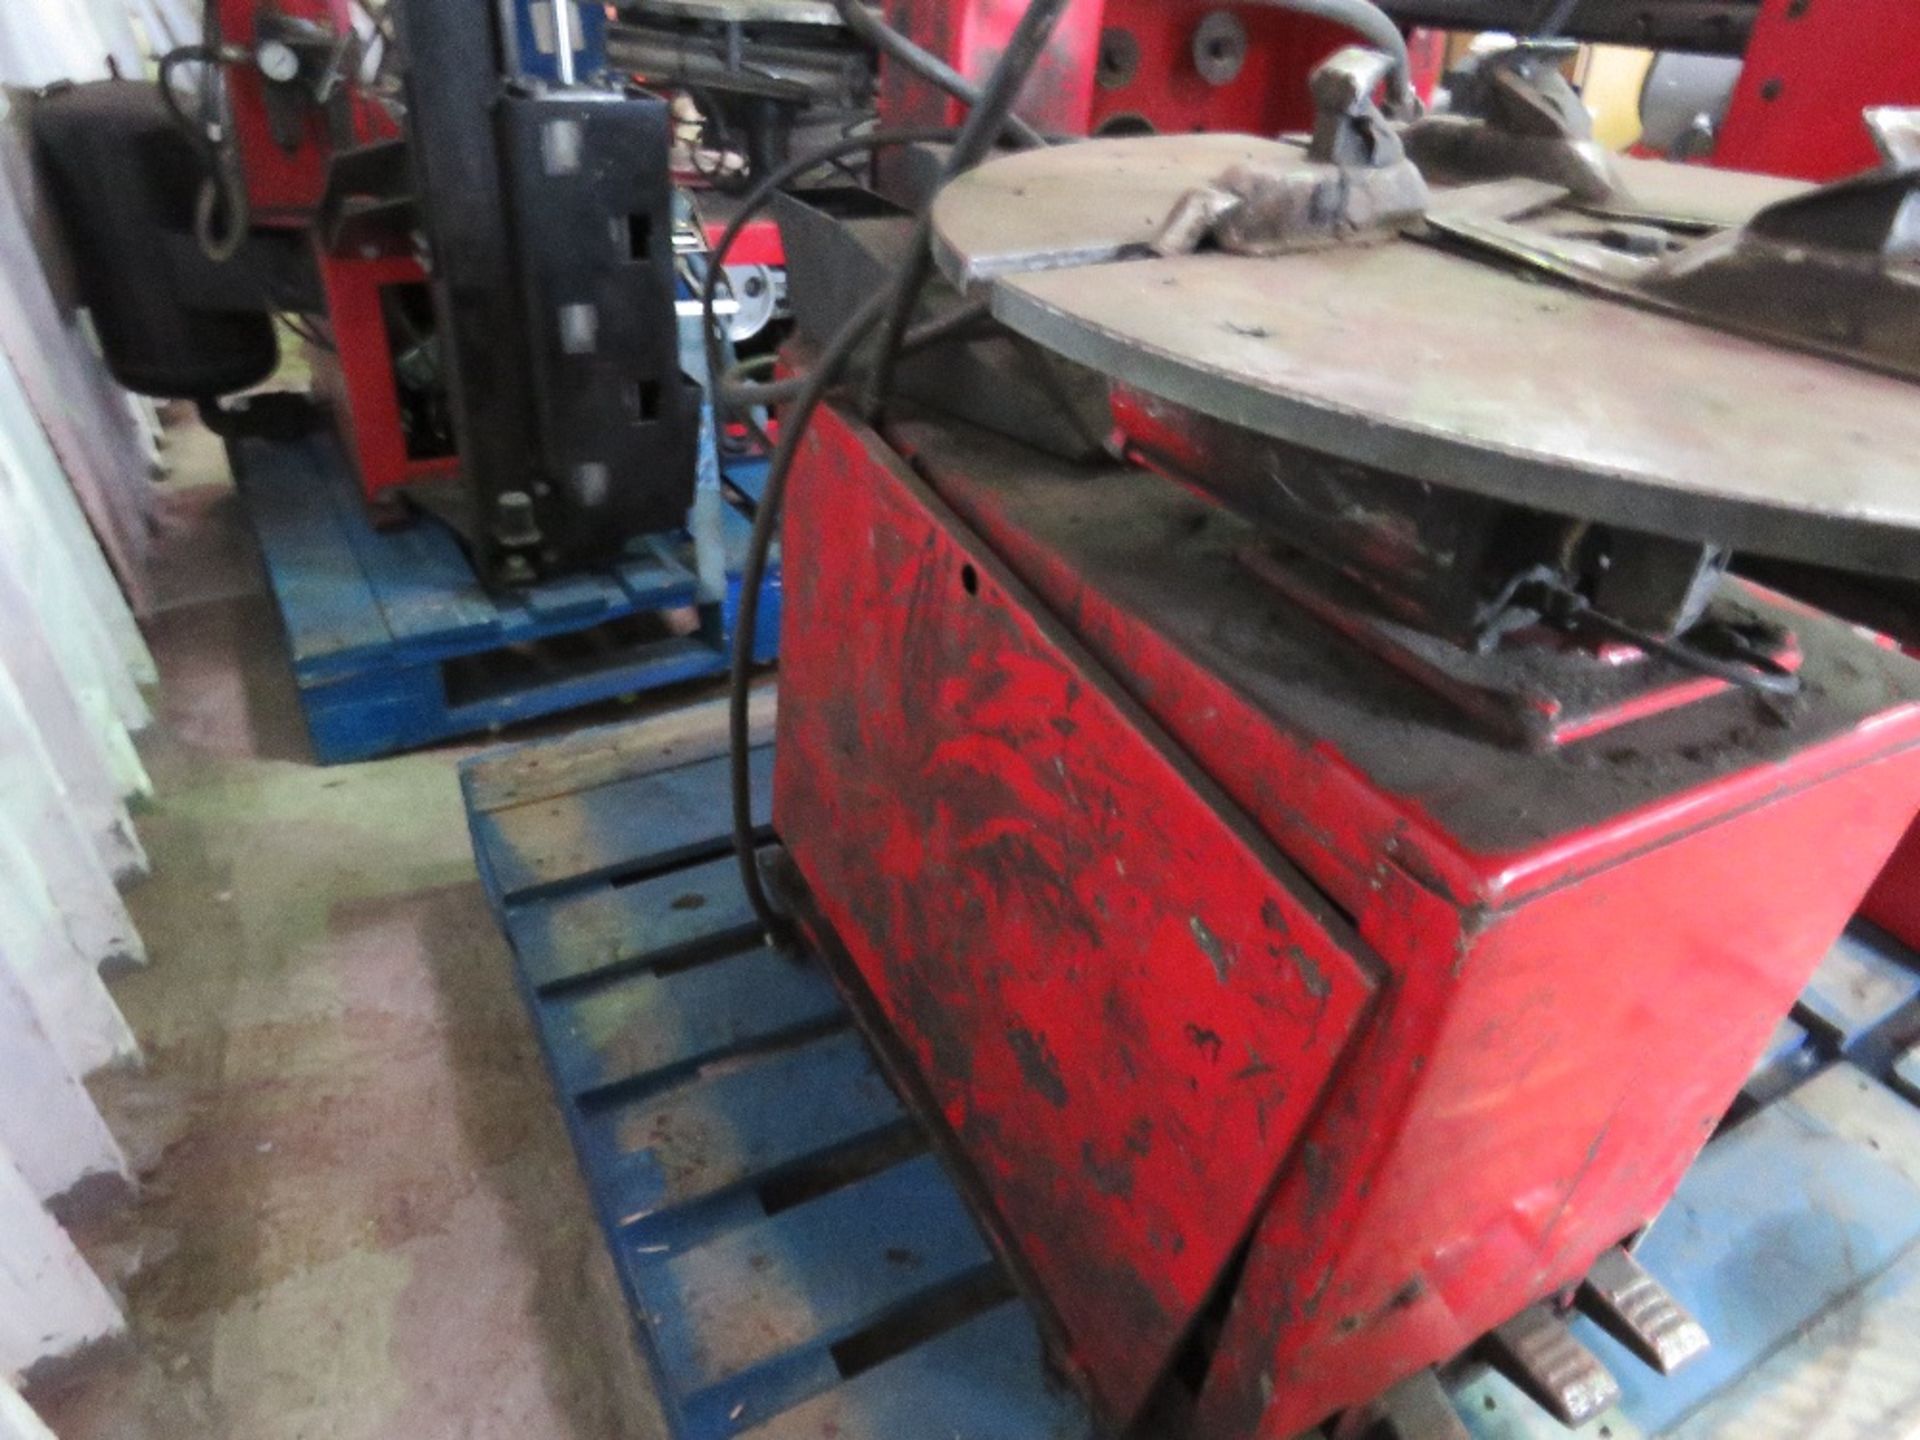 TYRE REMOVING MACHINE, 240VOLT POWERED. WORKING WHEN REMOVED FROM GARAGE LIQUIDATION. THIS LOT IS - Image 5 of 8